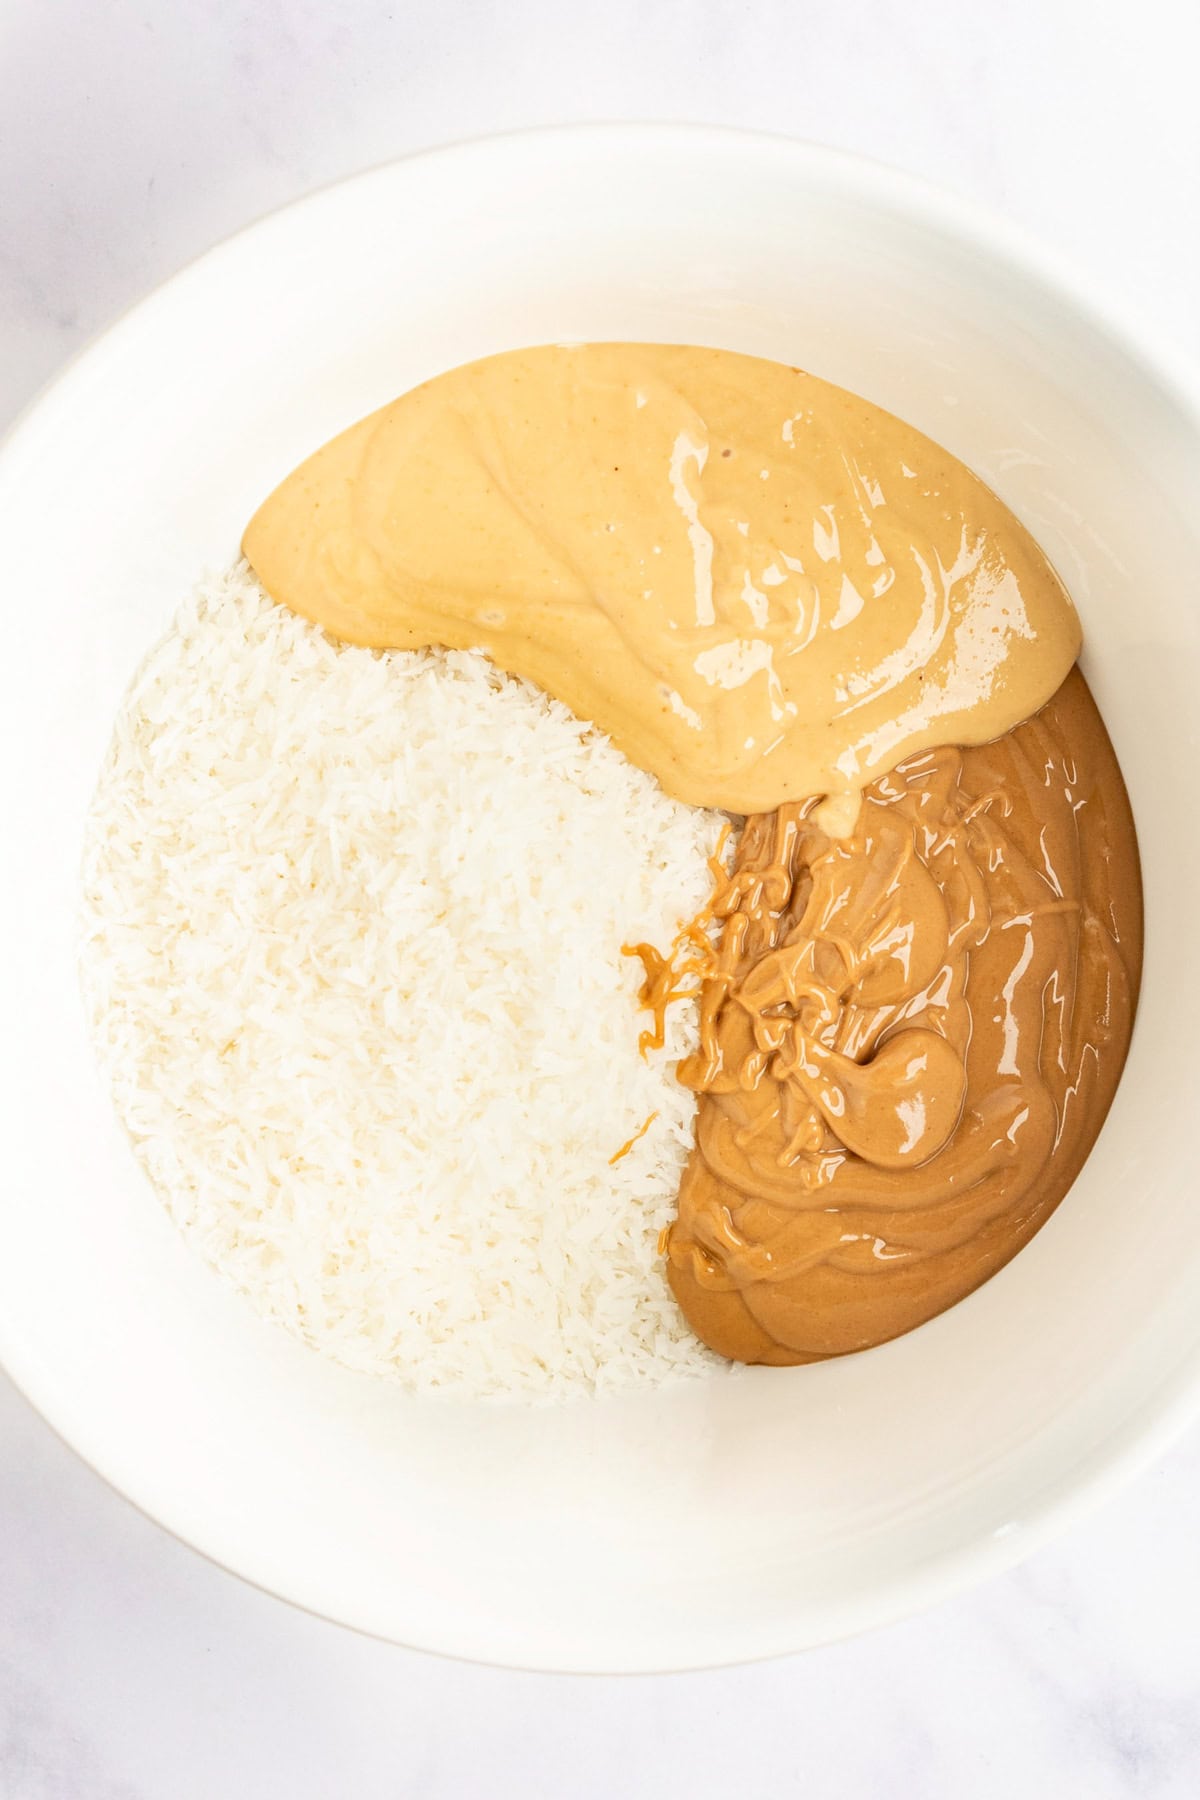 A bowl containing shredded coconut, smooth peanut butter, and crunchy peanut butter.